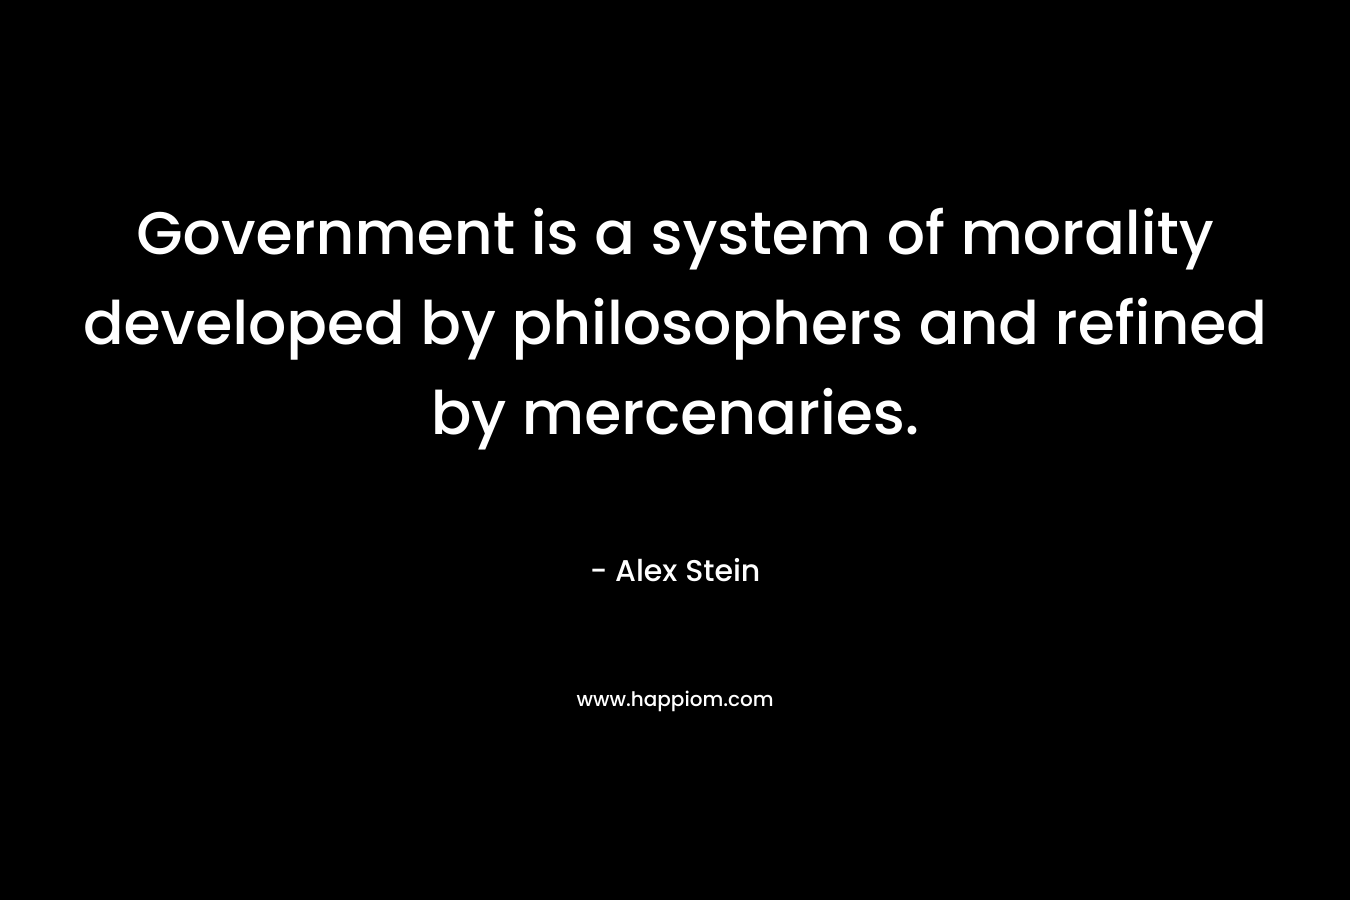 Government is a system of morality developed by philosophers and refined by mercenaries.